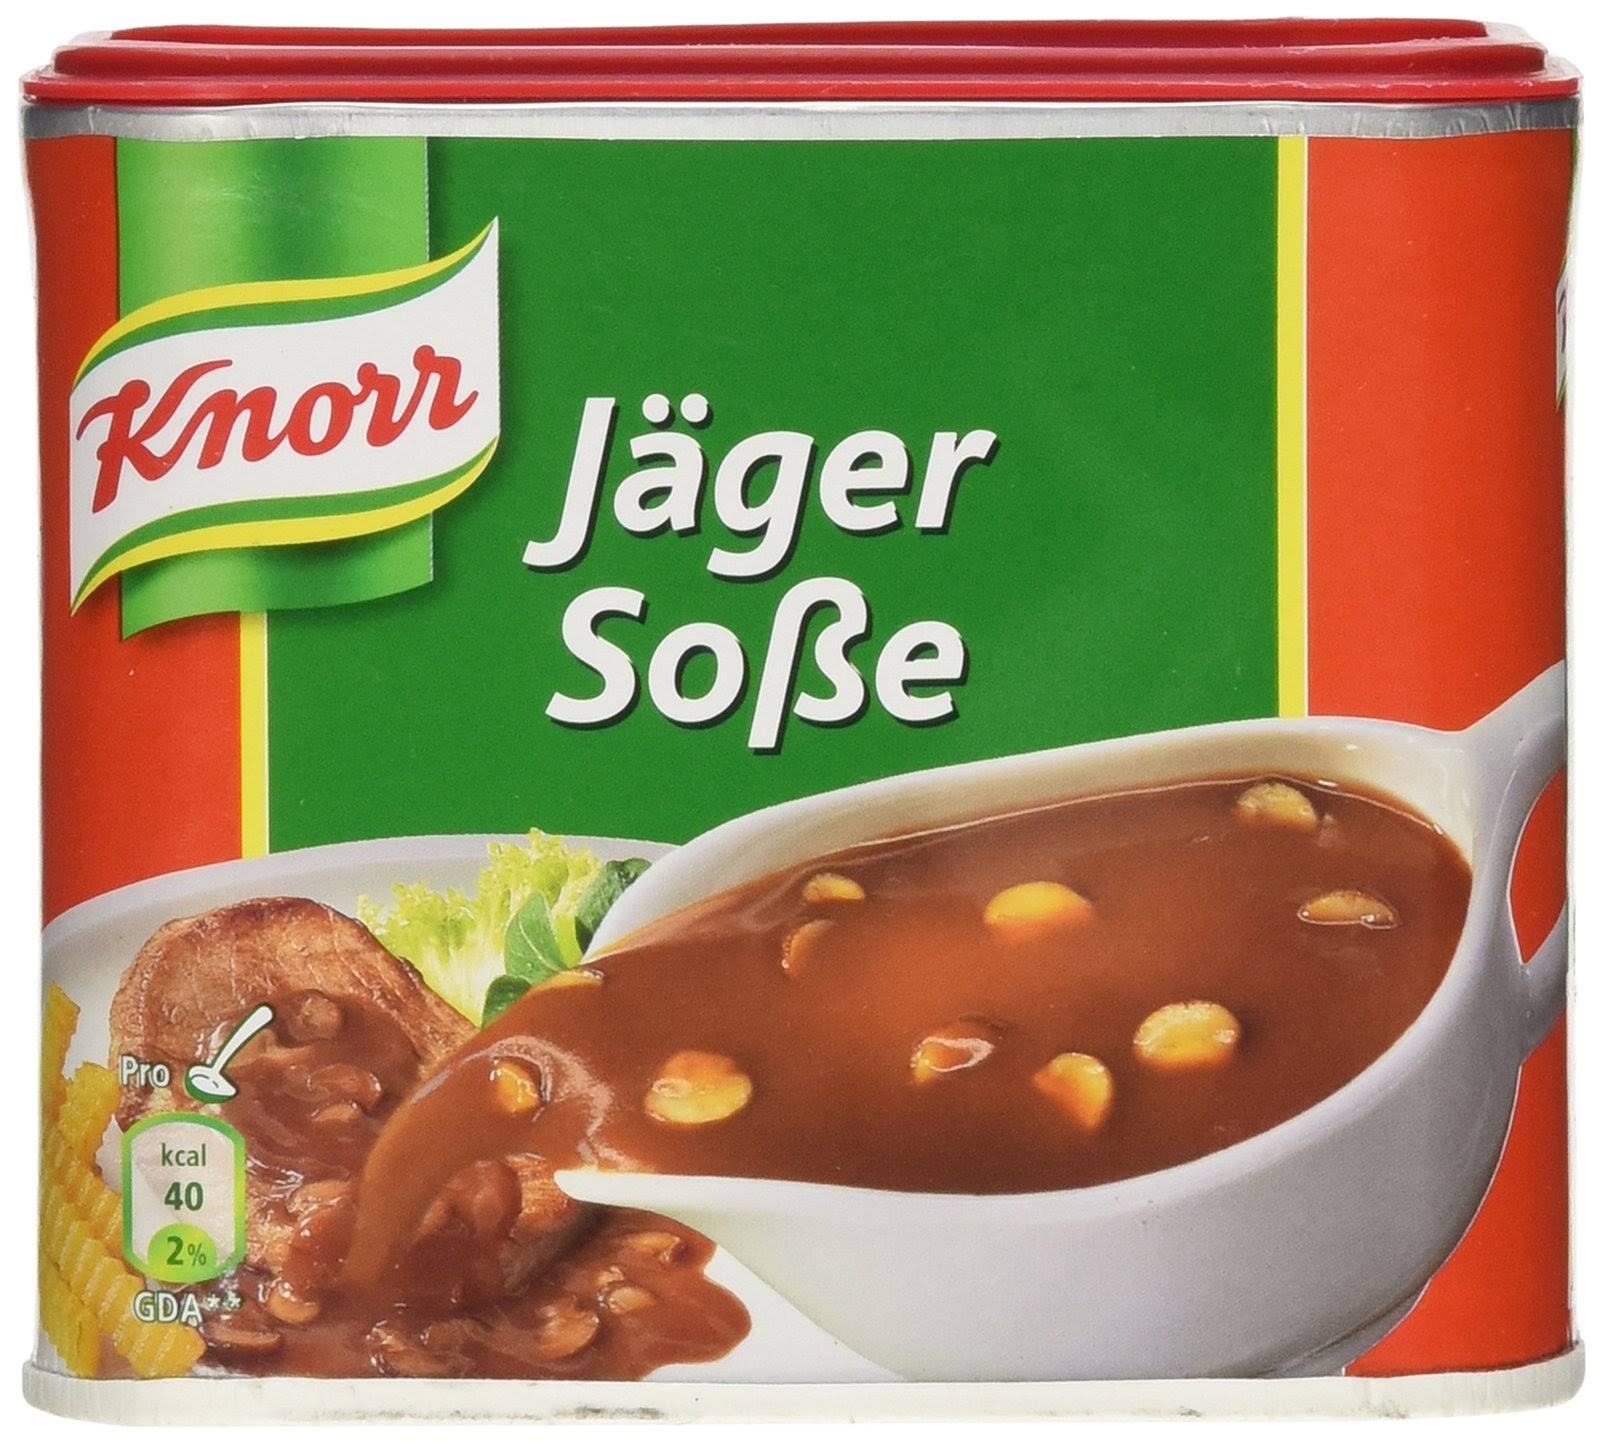 Knorr Jager Sosse Hunter Sauce Big Box For 2 Liters Made in Germany New 4038700117243